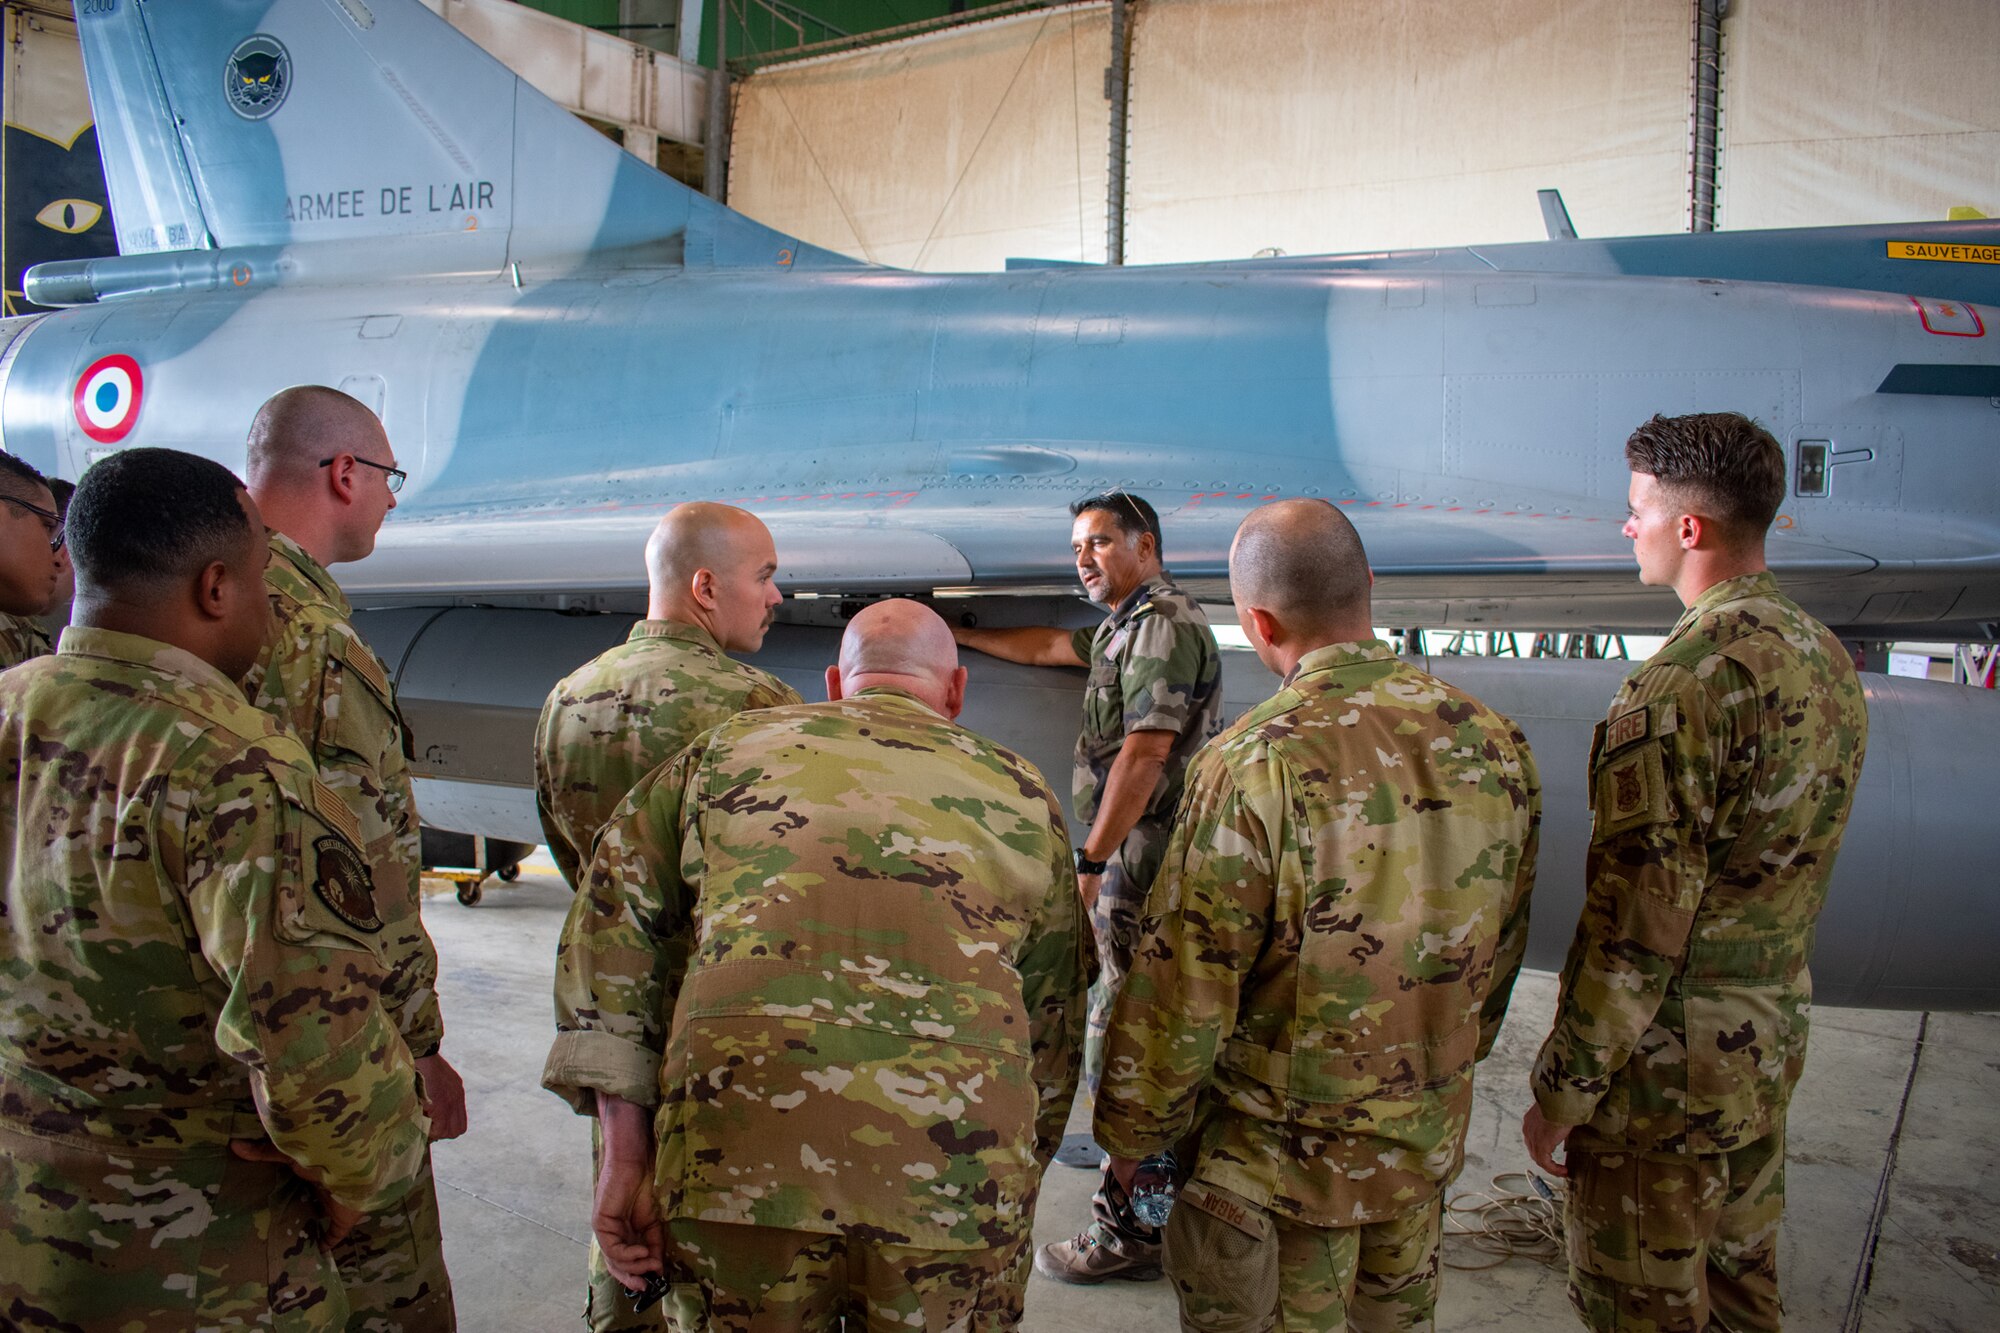 Commandant (Major) Eric from the 03/011 CORSE French fighter squadron shows 776th Expeditionary Air Base Squadron firefighters emergency procedures on the French Mirage 2000 at Base aerienne 188 “Colonel Massart”, Djibouti, Feb. 15, 2023. These joint training opportunities increase capabilities for both American and French Forces operating in east Africa. (U.S. Air Force photo by Tech. Sgt. Jordan LaPoint)